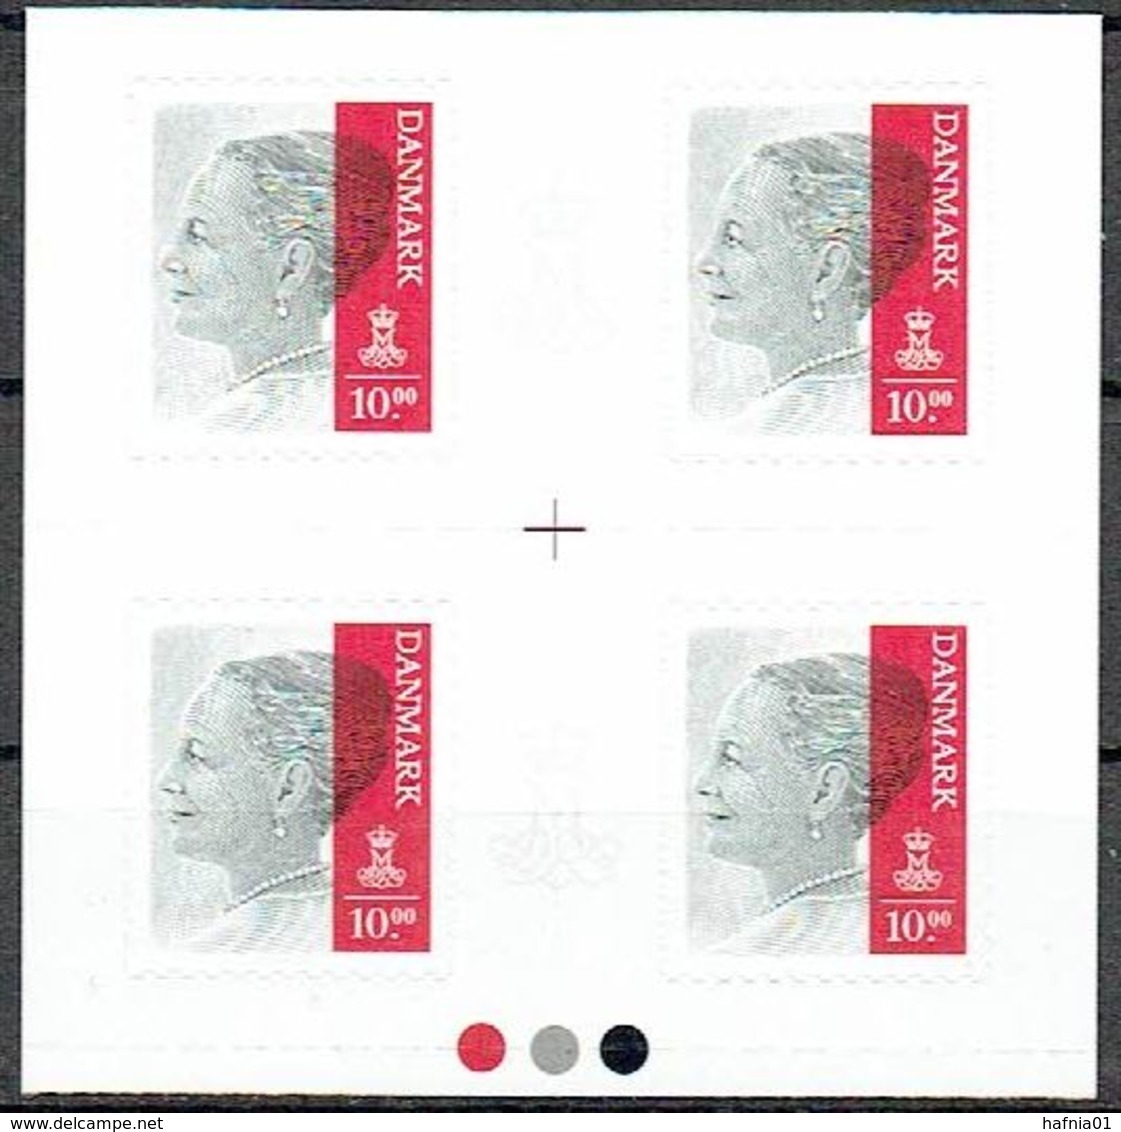 Denmark 2014. Queen Margrethe II.  Michel 1805 X 4 MNH.  With Markings. - Nuovi